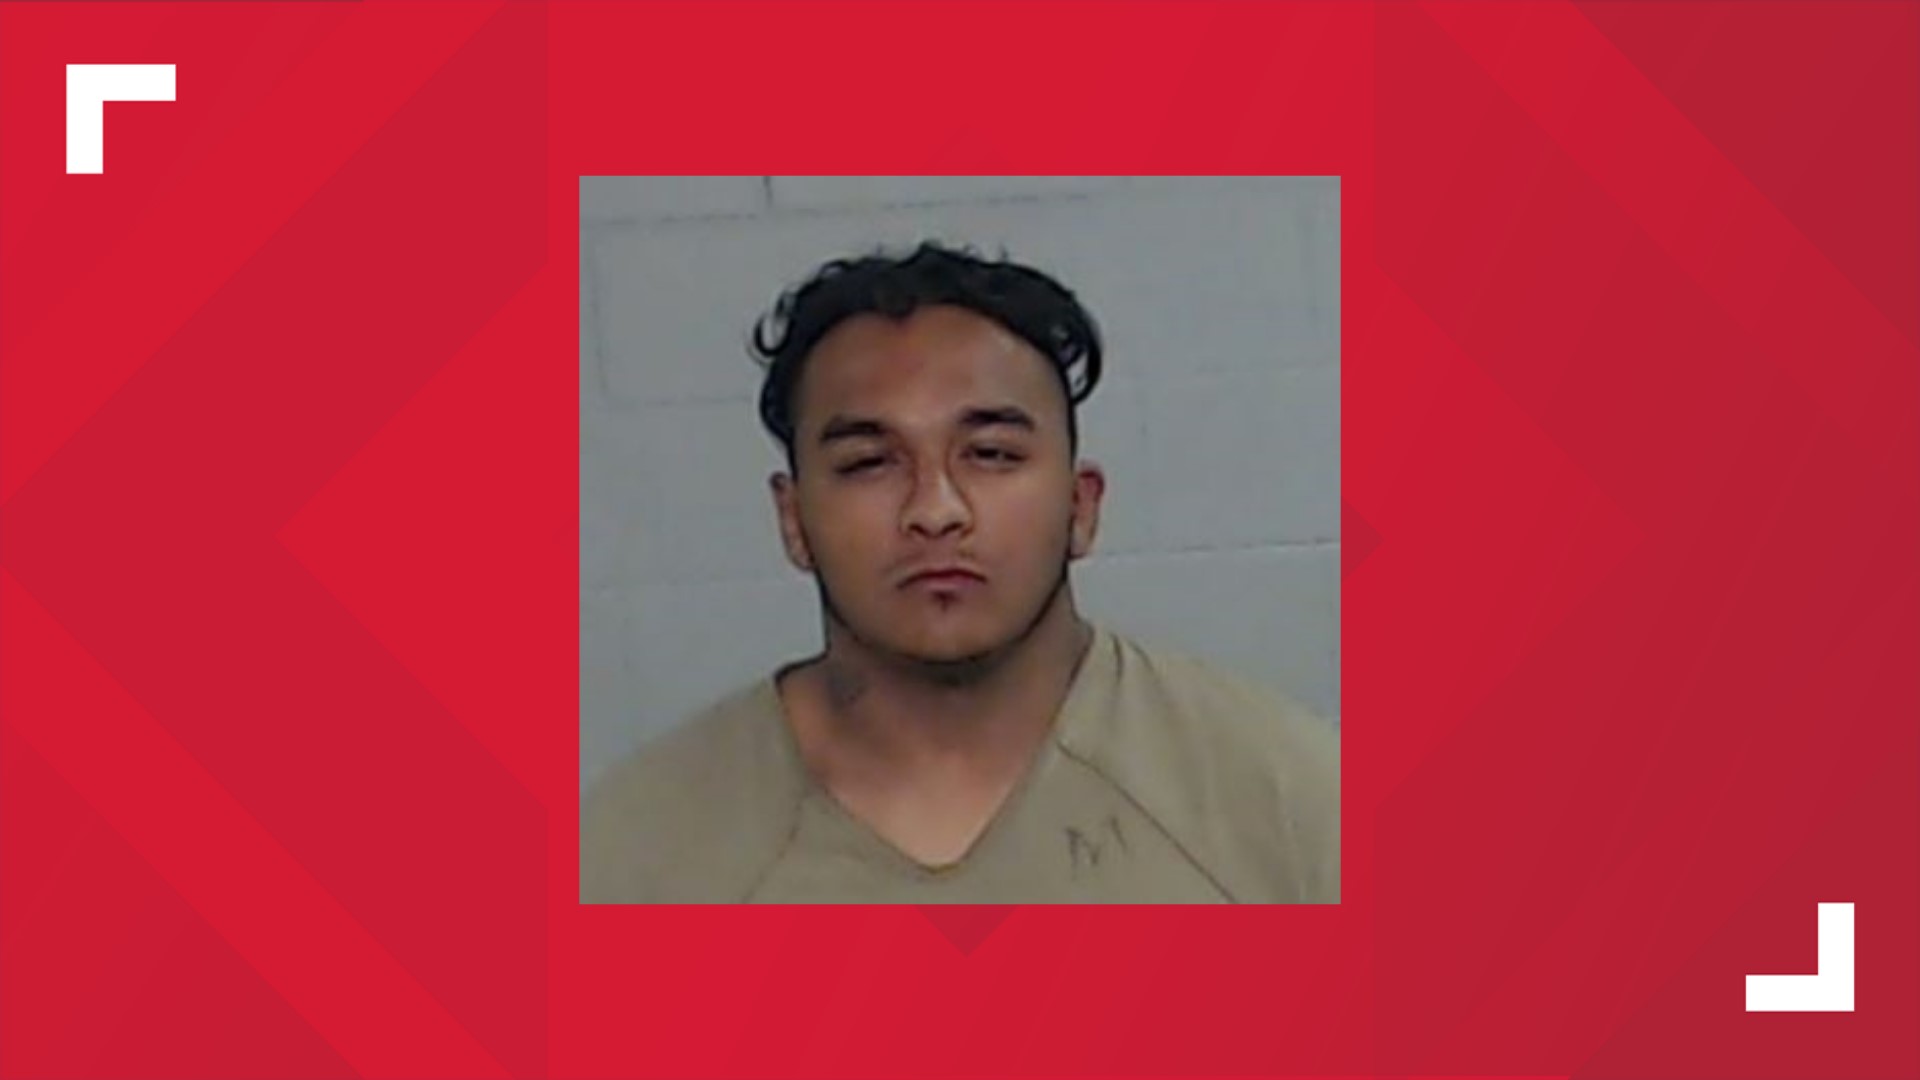 Joel Valdez was found guilty on two counts.